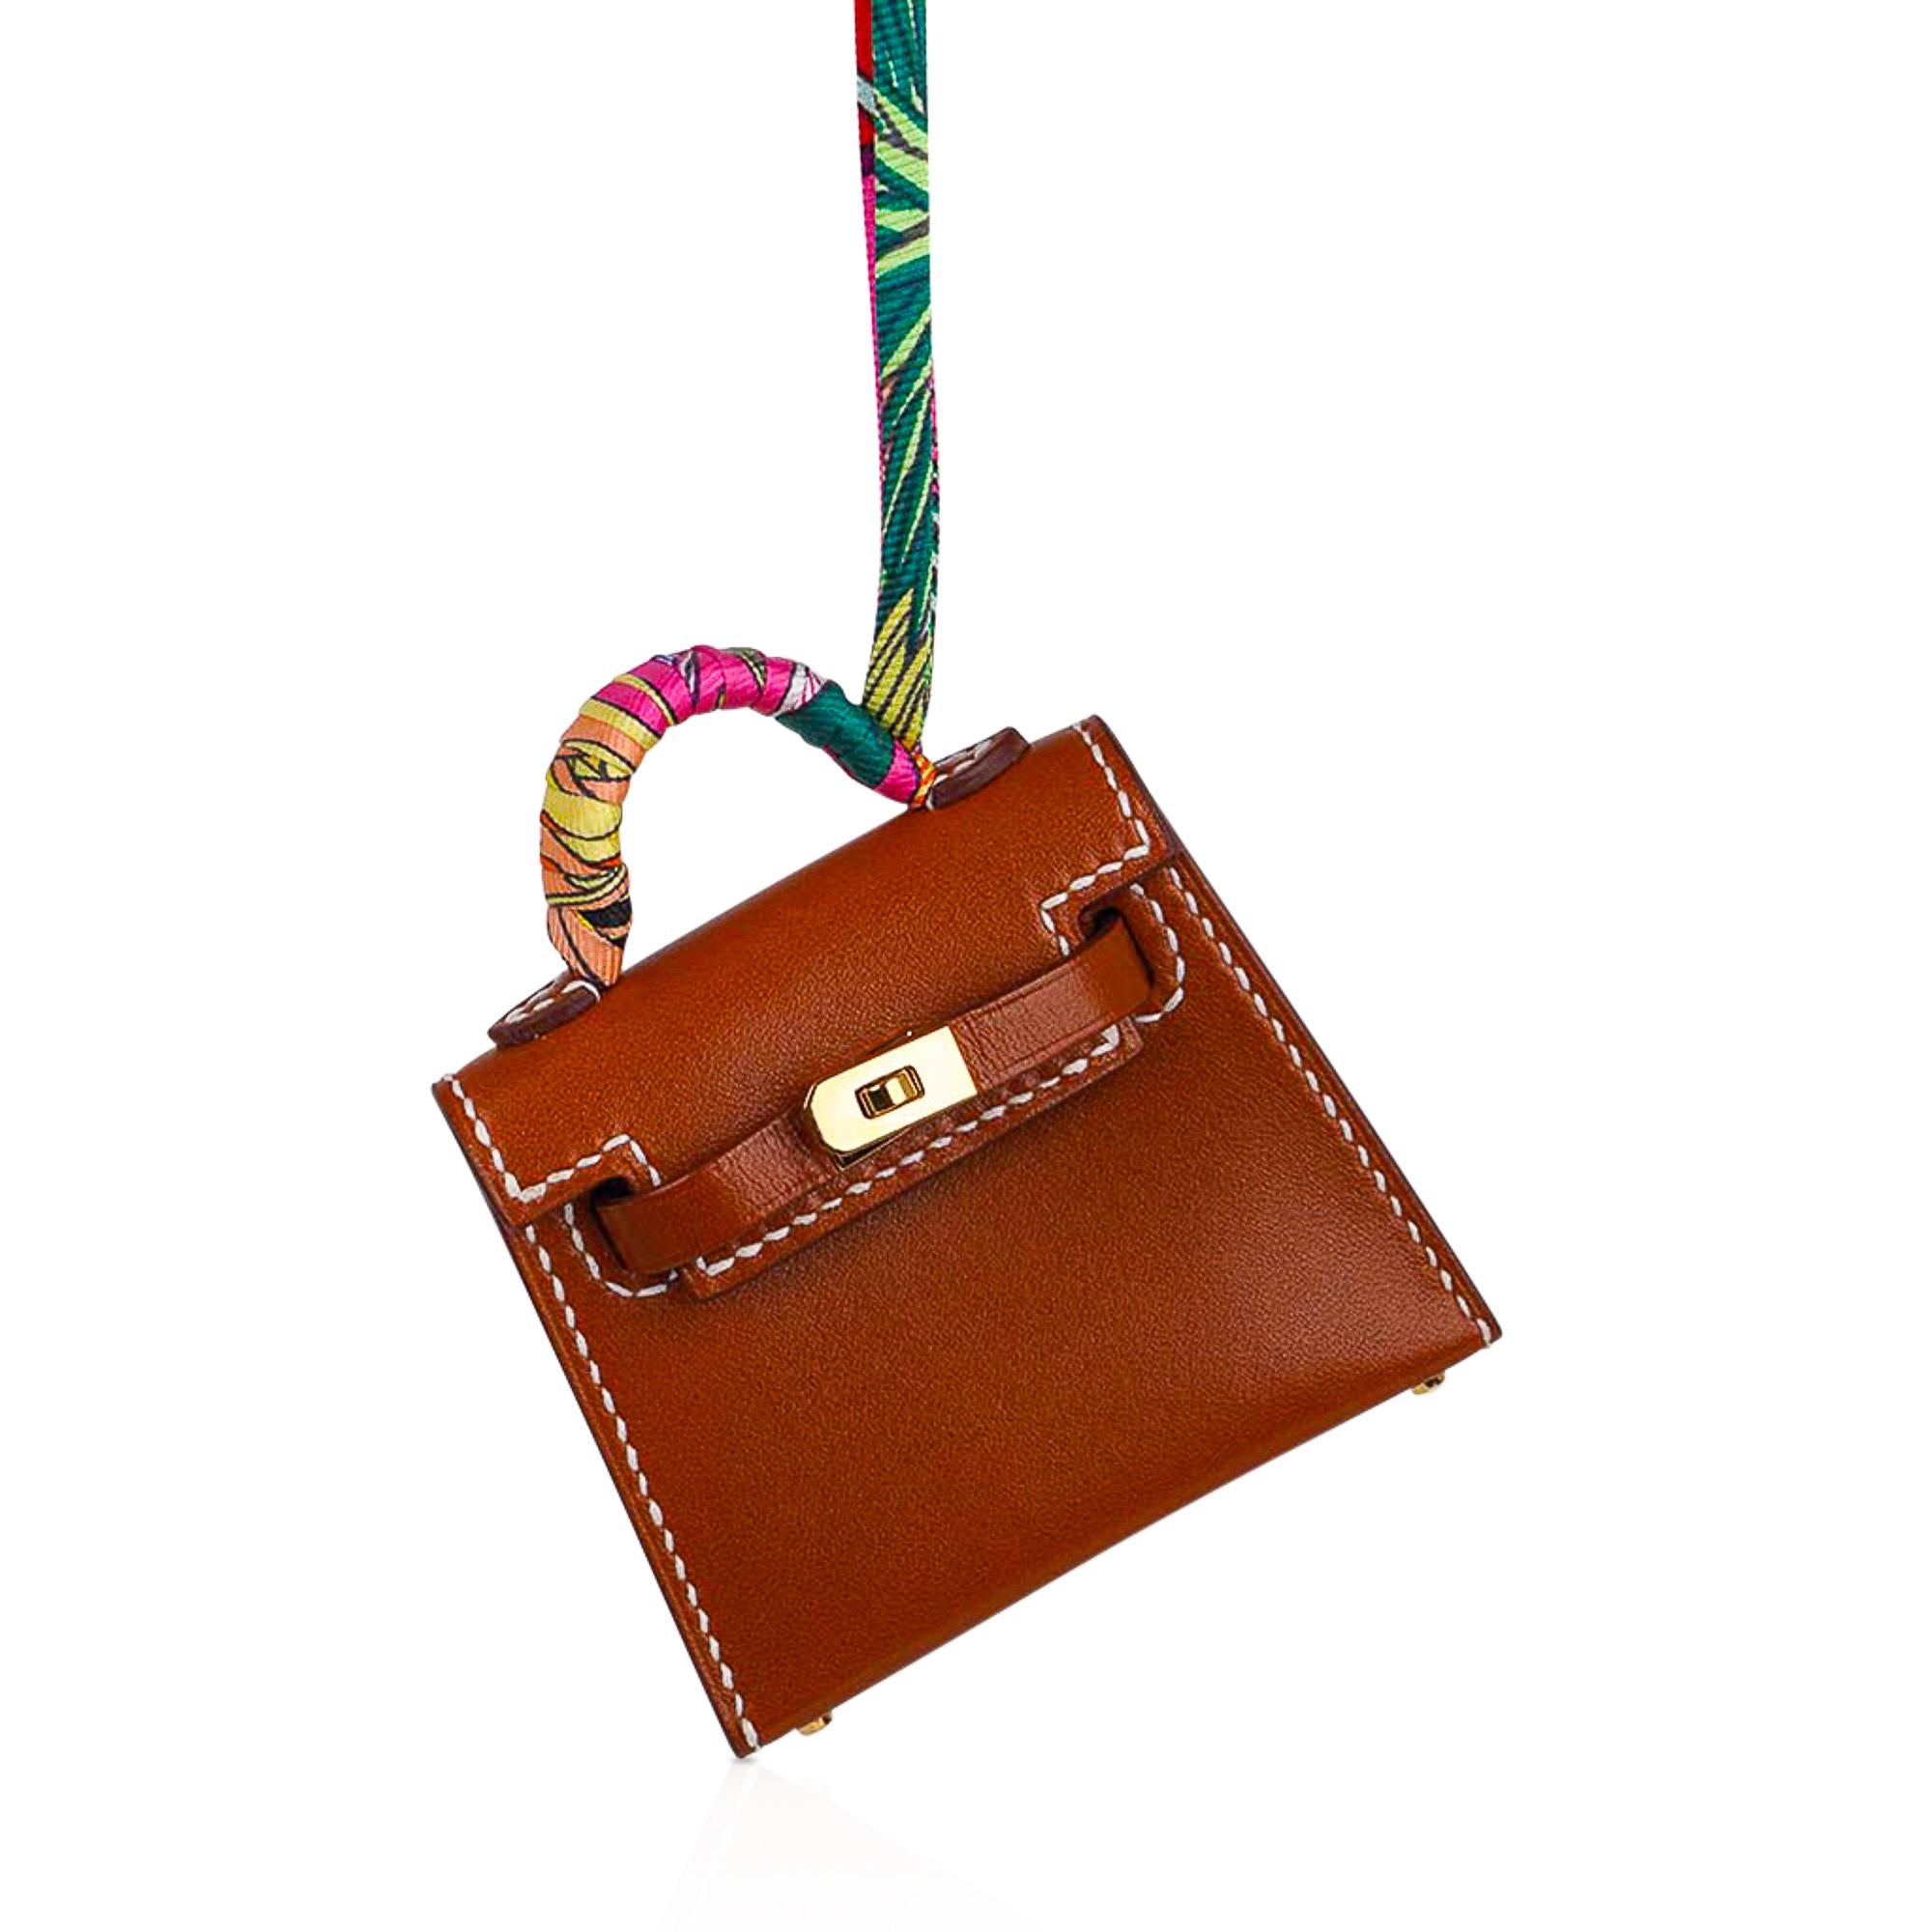 Mightychic offers a guaranteed authentic very rare limited edition Hermes Kelly Twilly Bag Charm features a miniature Kelly in Gold with signature bone topstitch.
Shaped like a Kelly Bag crafted in Tadelakt leather with amazing detail with working